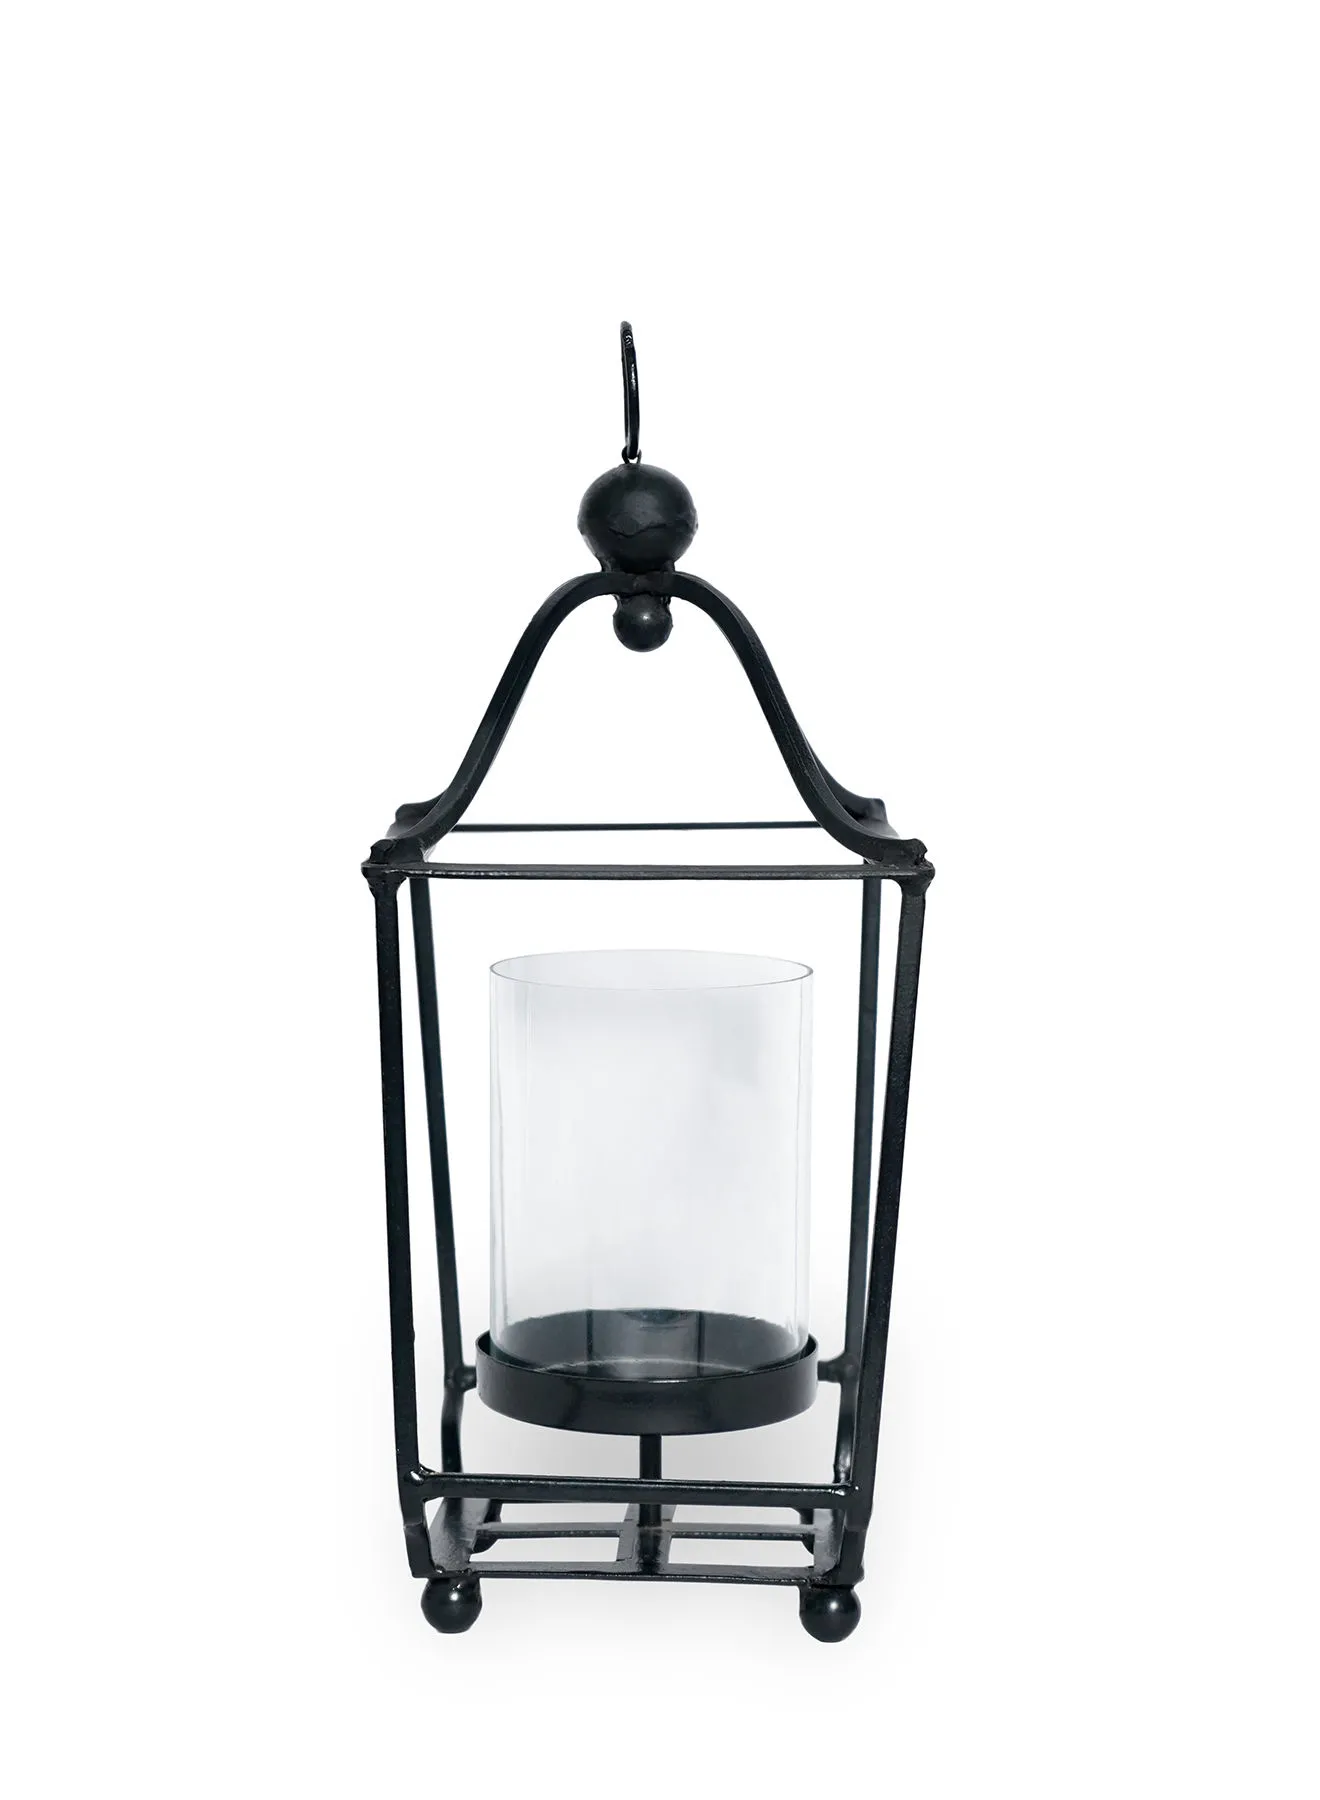 ebb & flow Modern Ideal Design Handmade Lantern Unique Luxury Quality Scents For The Perfect Stylish Home Black 10X9X27centimeter